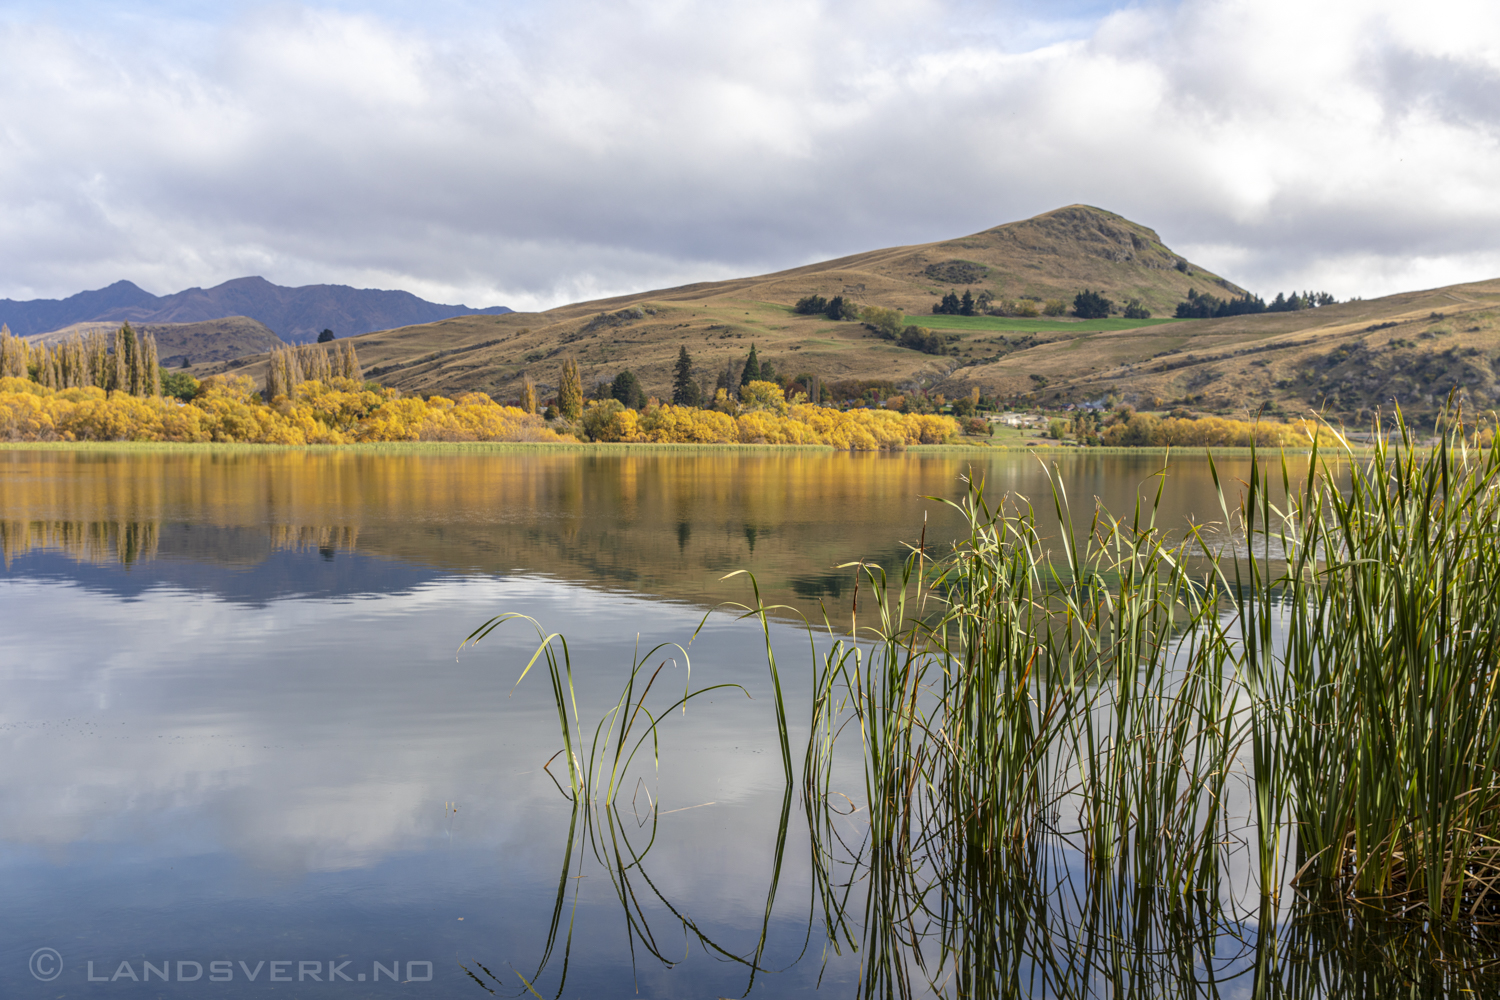 Lake Hayes, New Zealand. 

(Canon EOS 5D Mark IV / Canon EF 24-70mm f/2.8 L II USM)